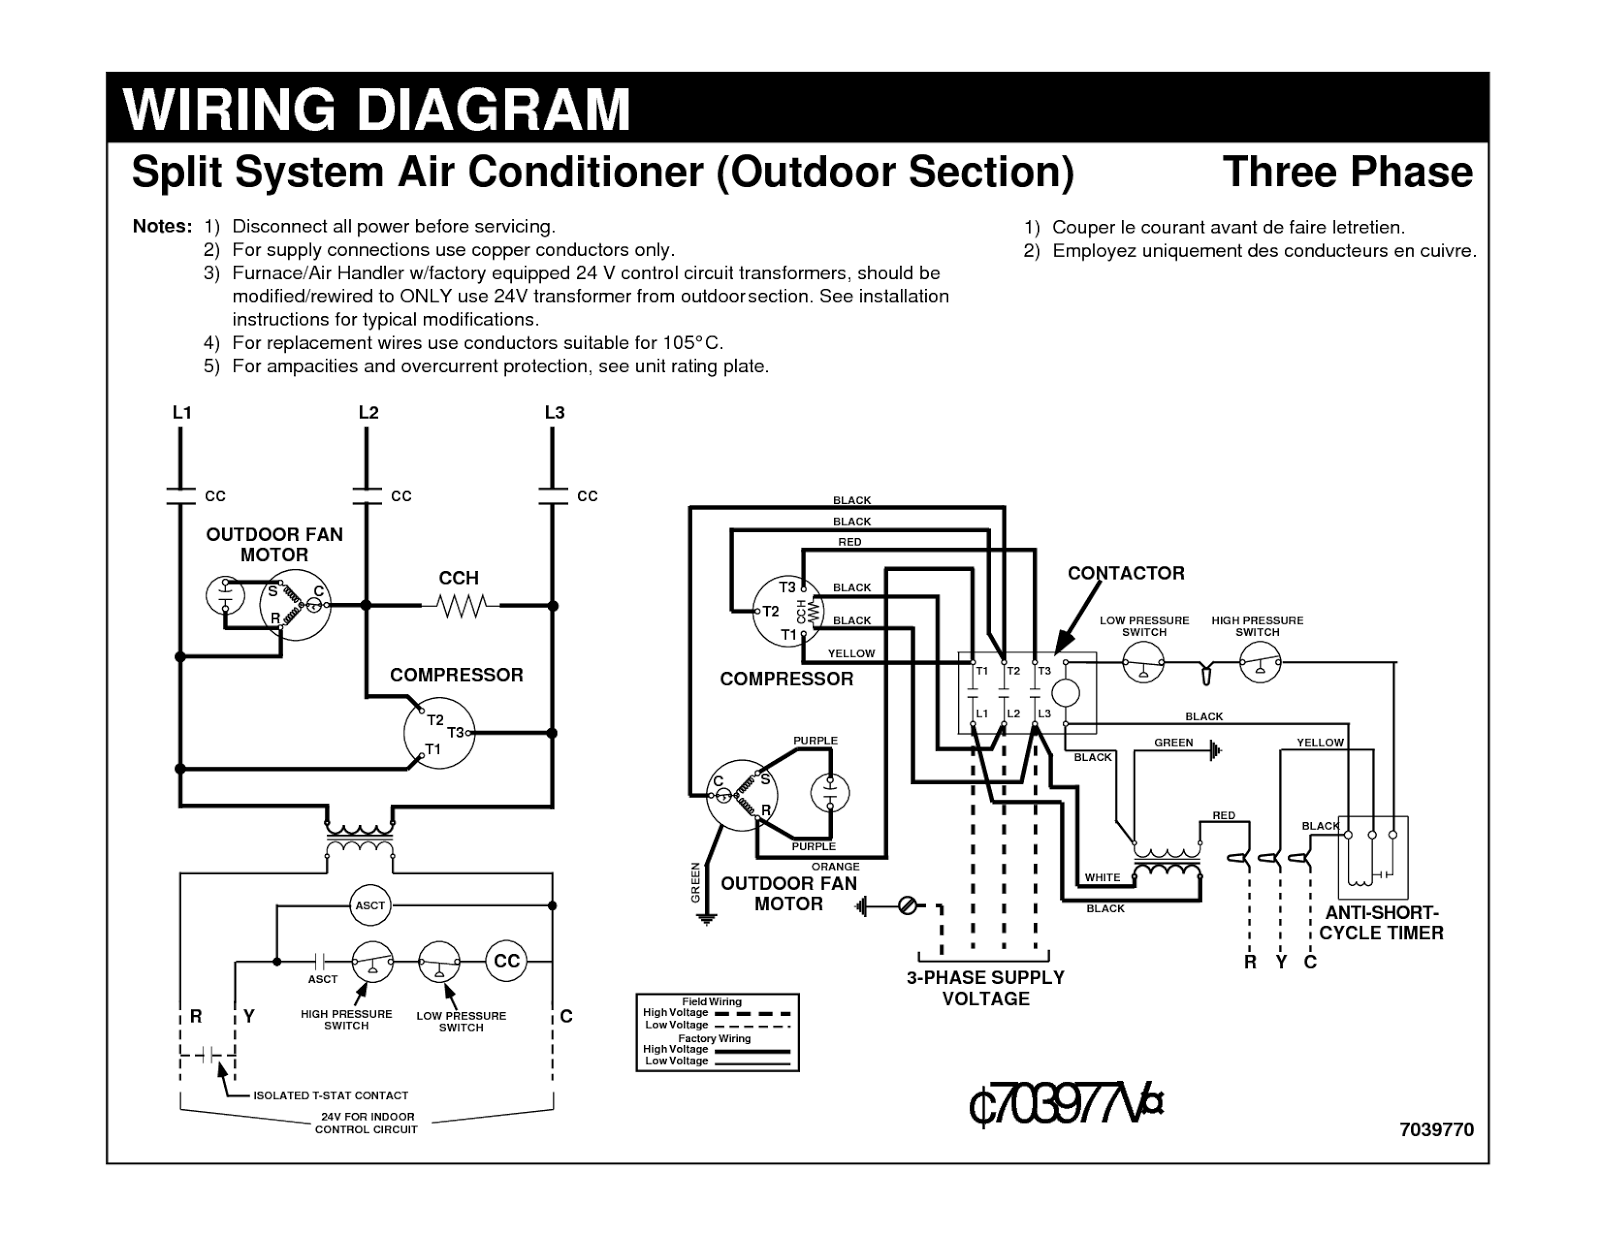 Electrical Wiring Diagrams For Air Conditioning Systems Part One Electrical Knowhow